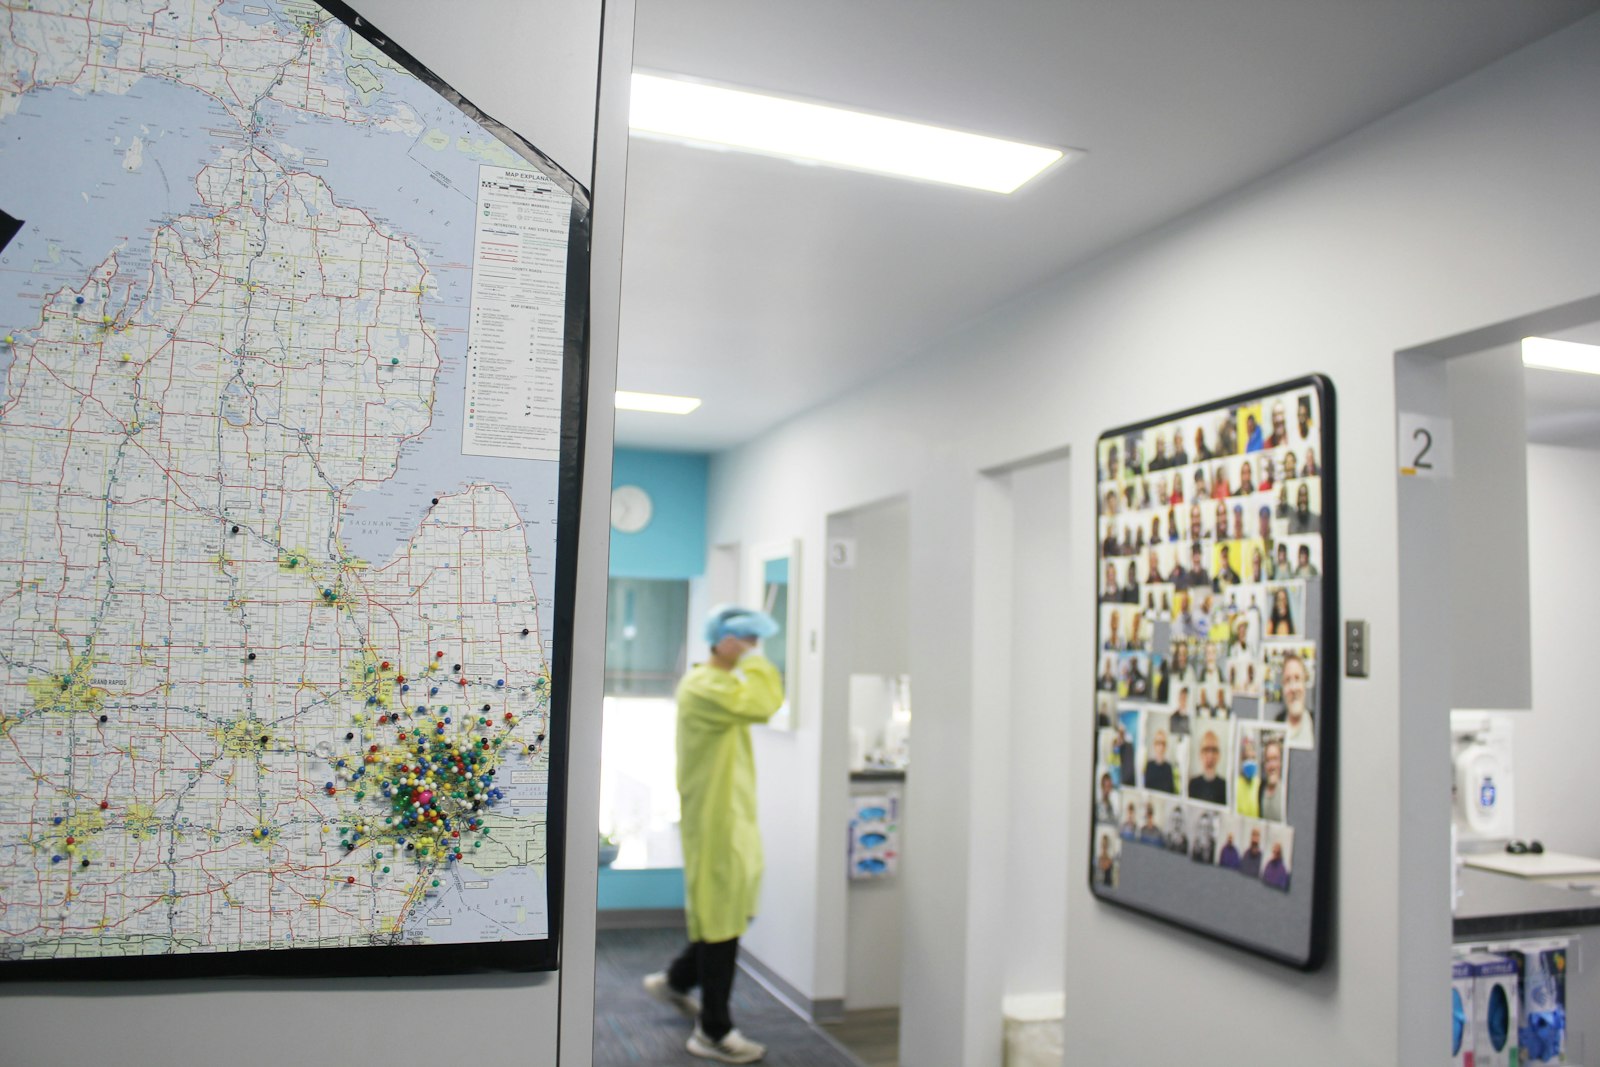 At left, a map with pins shows the locations where volunteers to the Malta Medical and Dental Clinic come from, while a bulletin board at right shows the faces of patients.